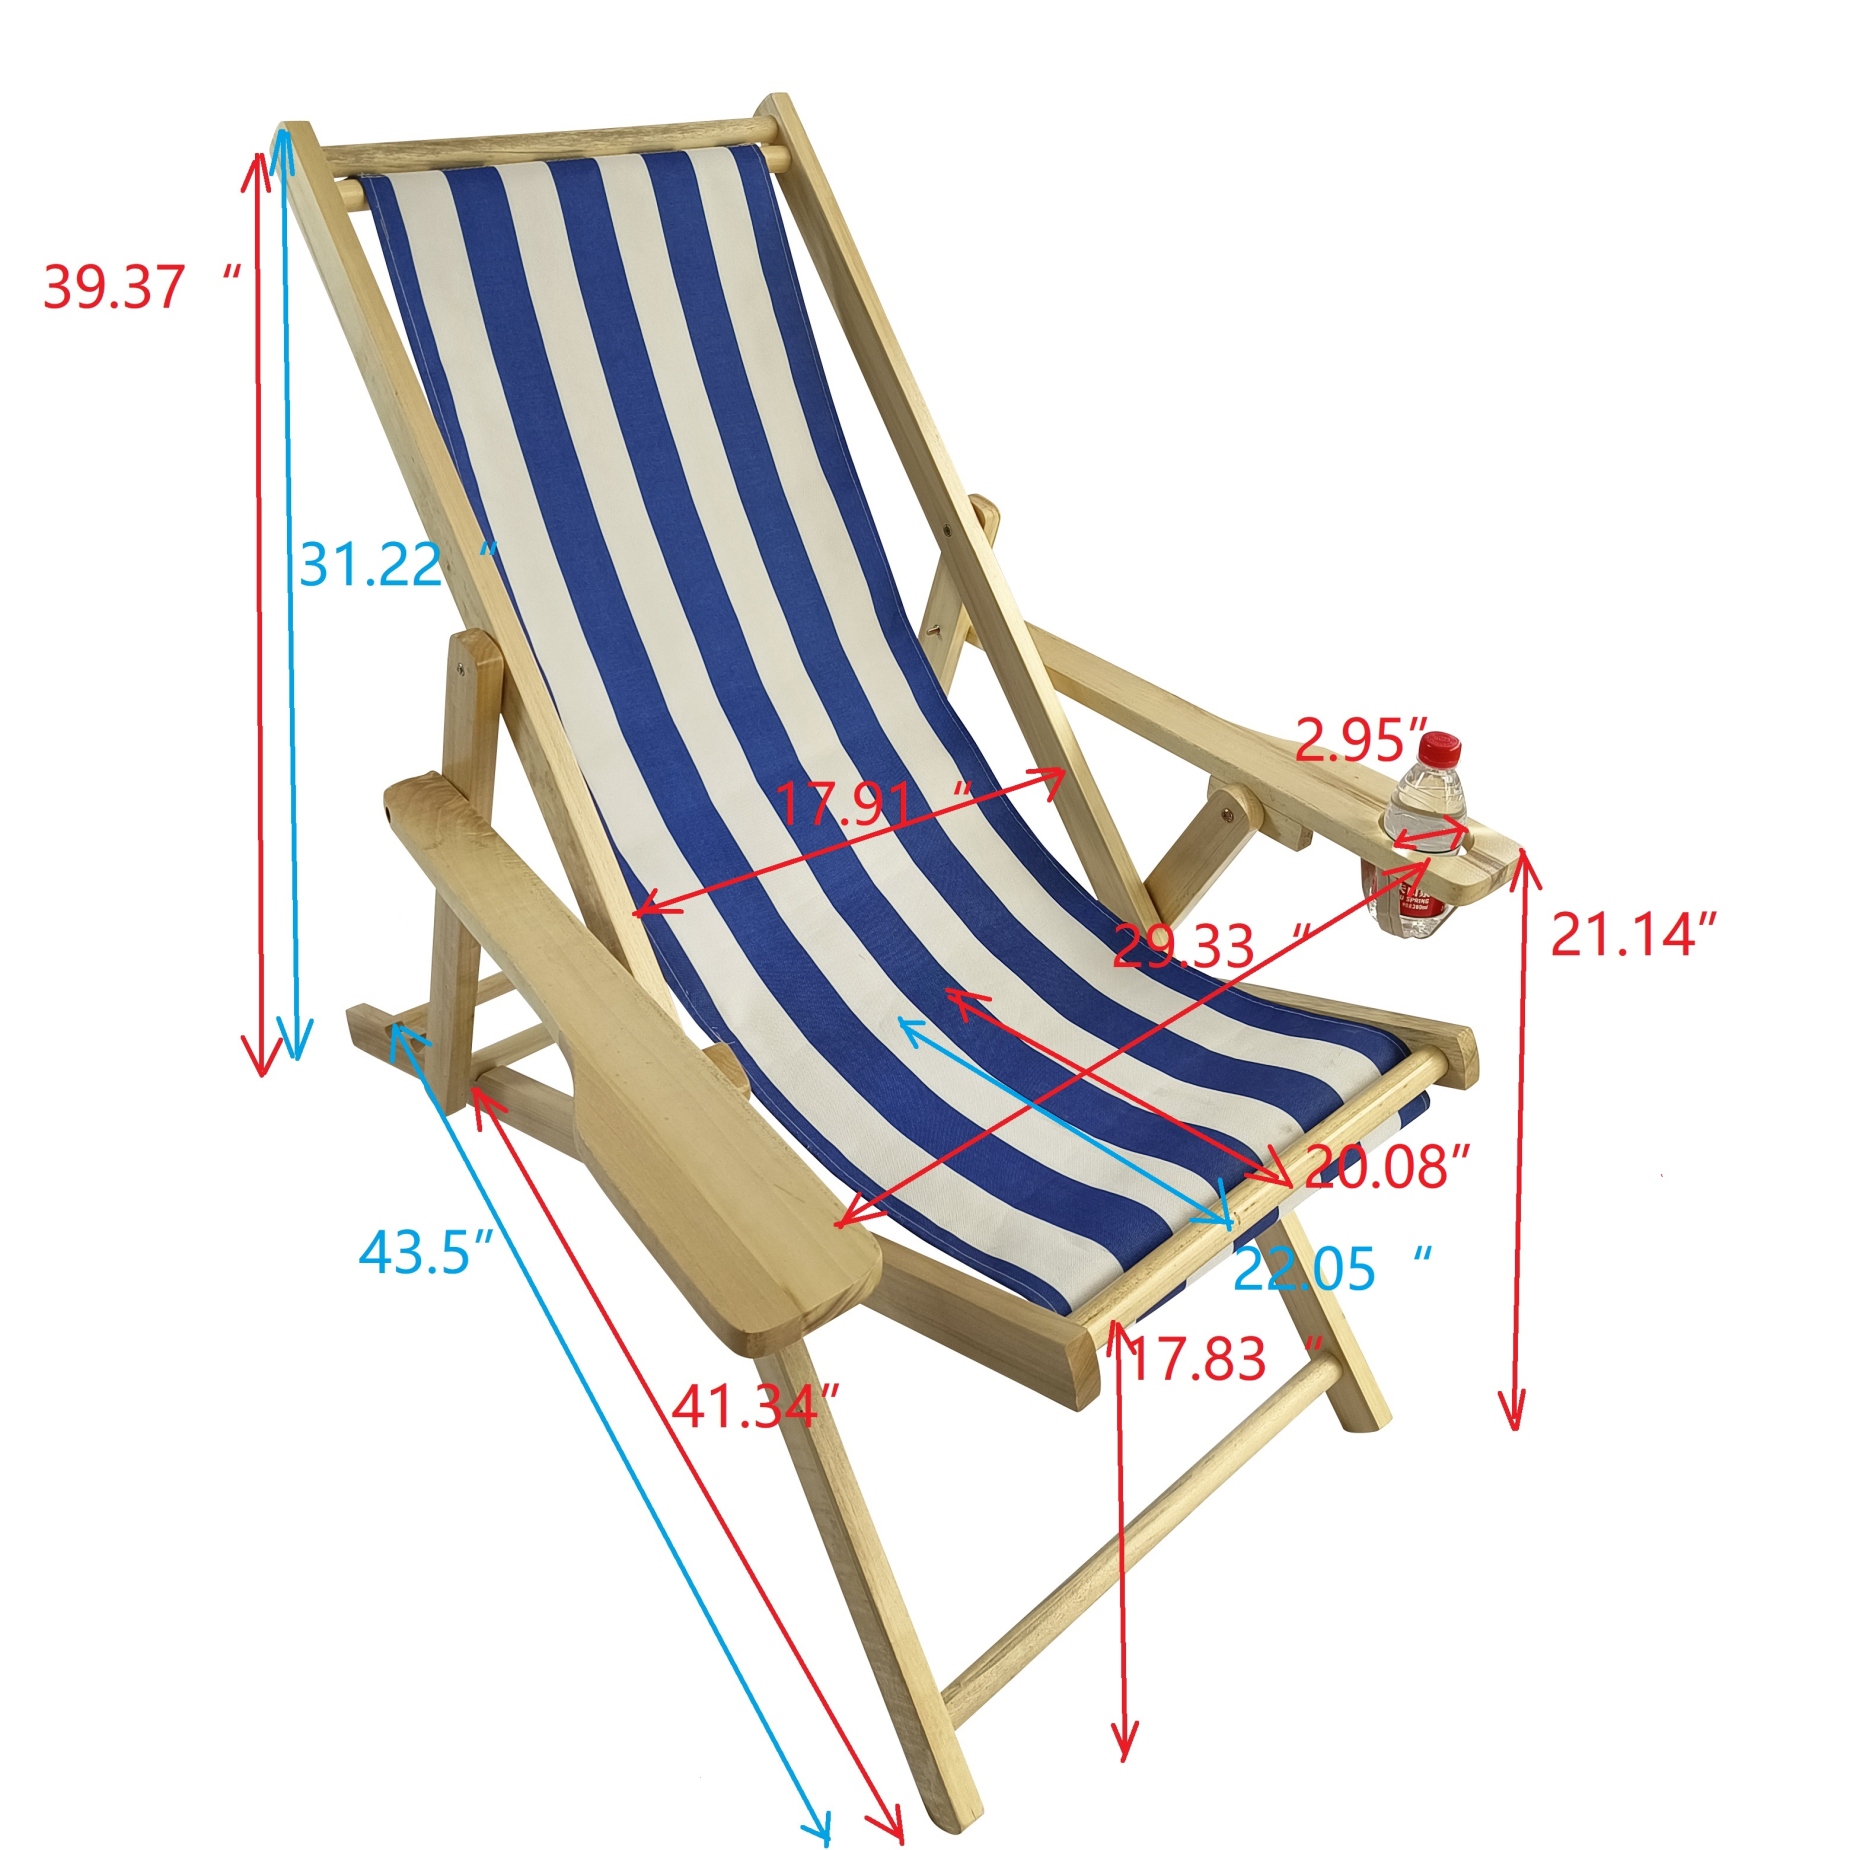 Outdoor Folding Beach Chaise Lounge Chair Camping Recliner, Sling Chair Beach Recliner, Beach Chair with Adjustable Back, Pool Chair Outdoor Chair Garden Chair, Portable Chair - image 2 of 9